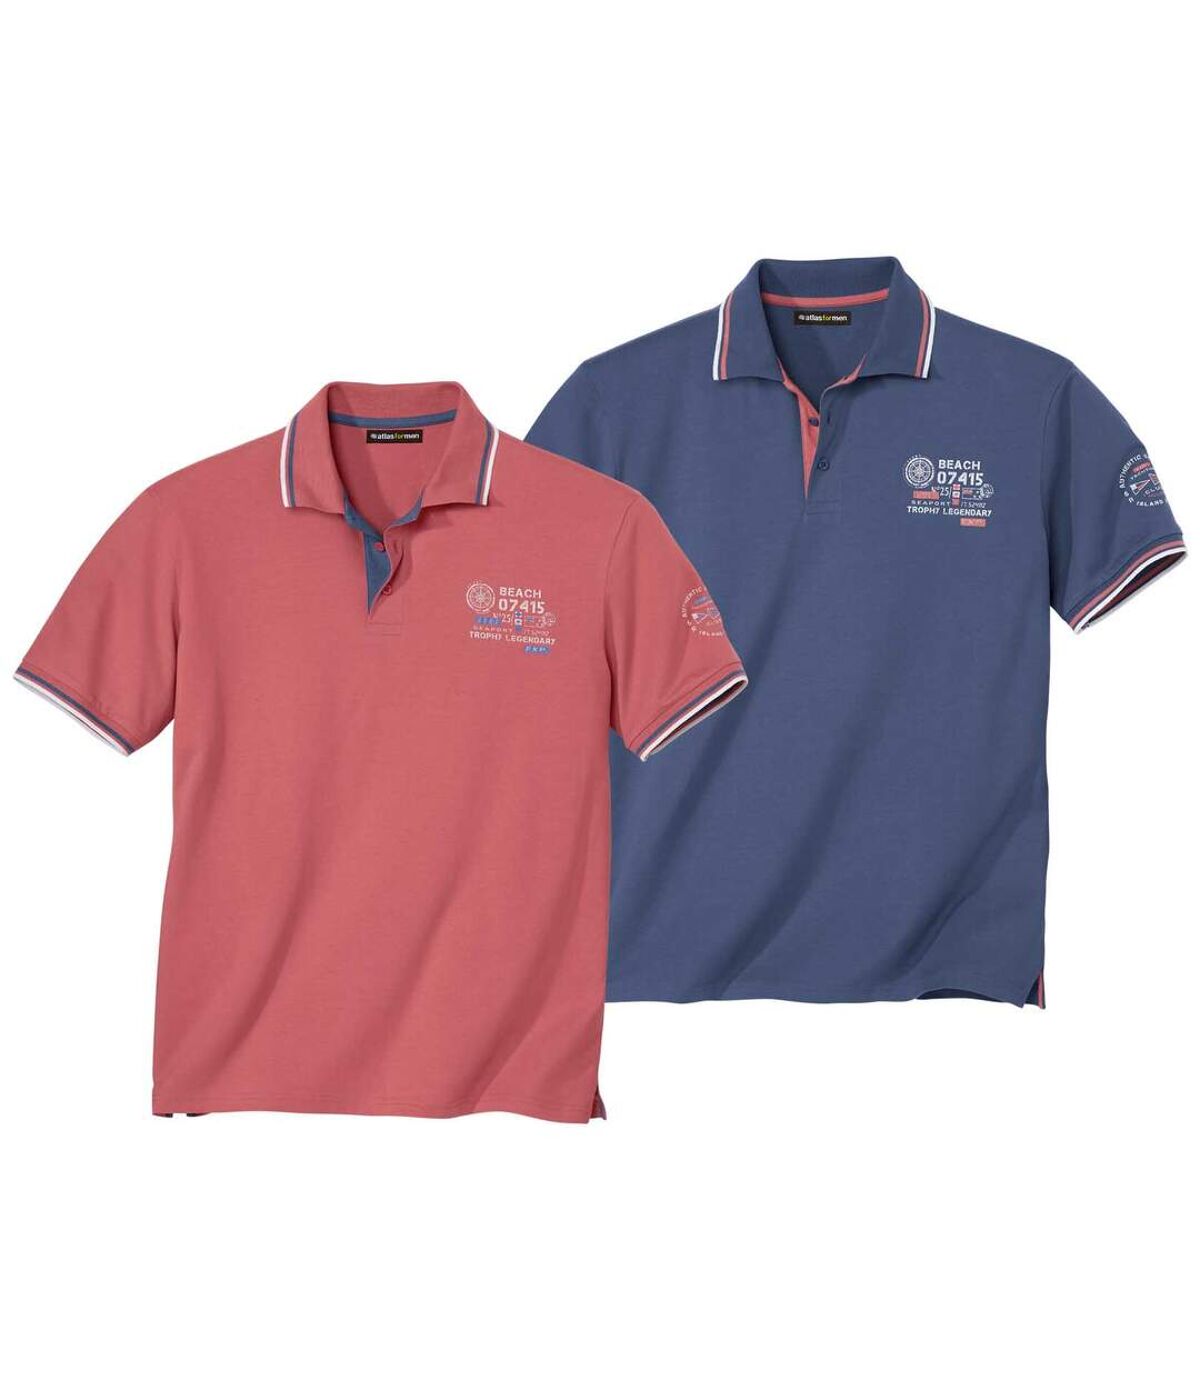 Pack of 2 Men's Sailing Polo Shirts - Blue Coral Atlas For Men